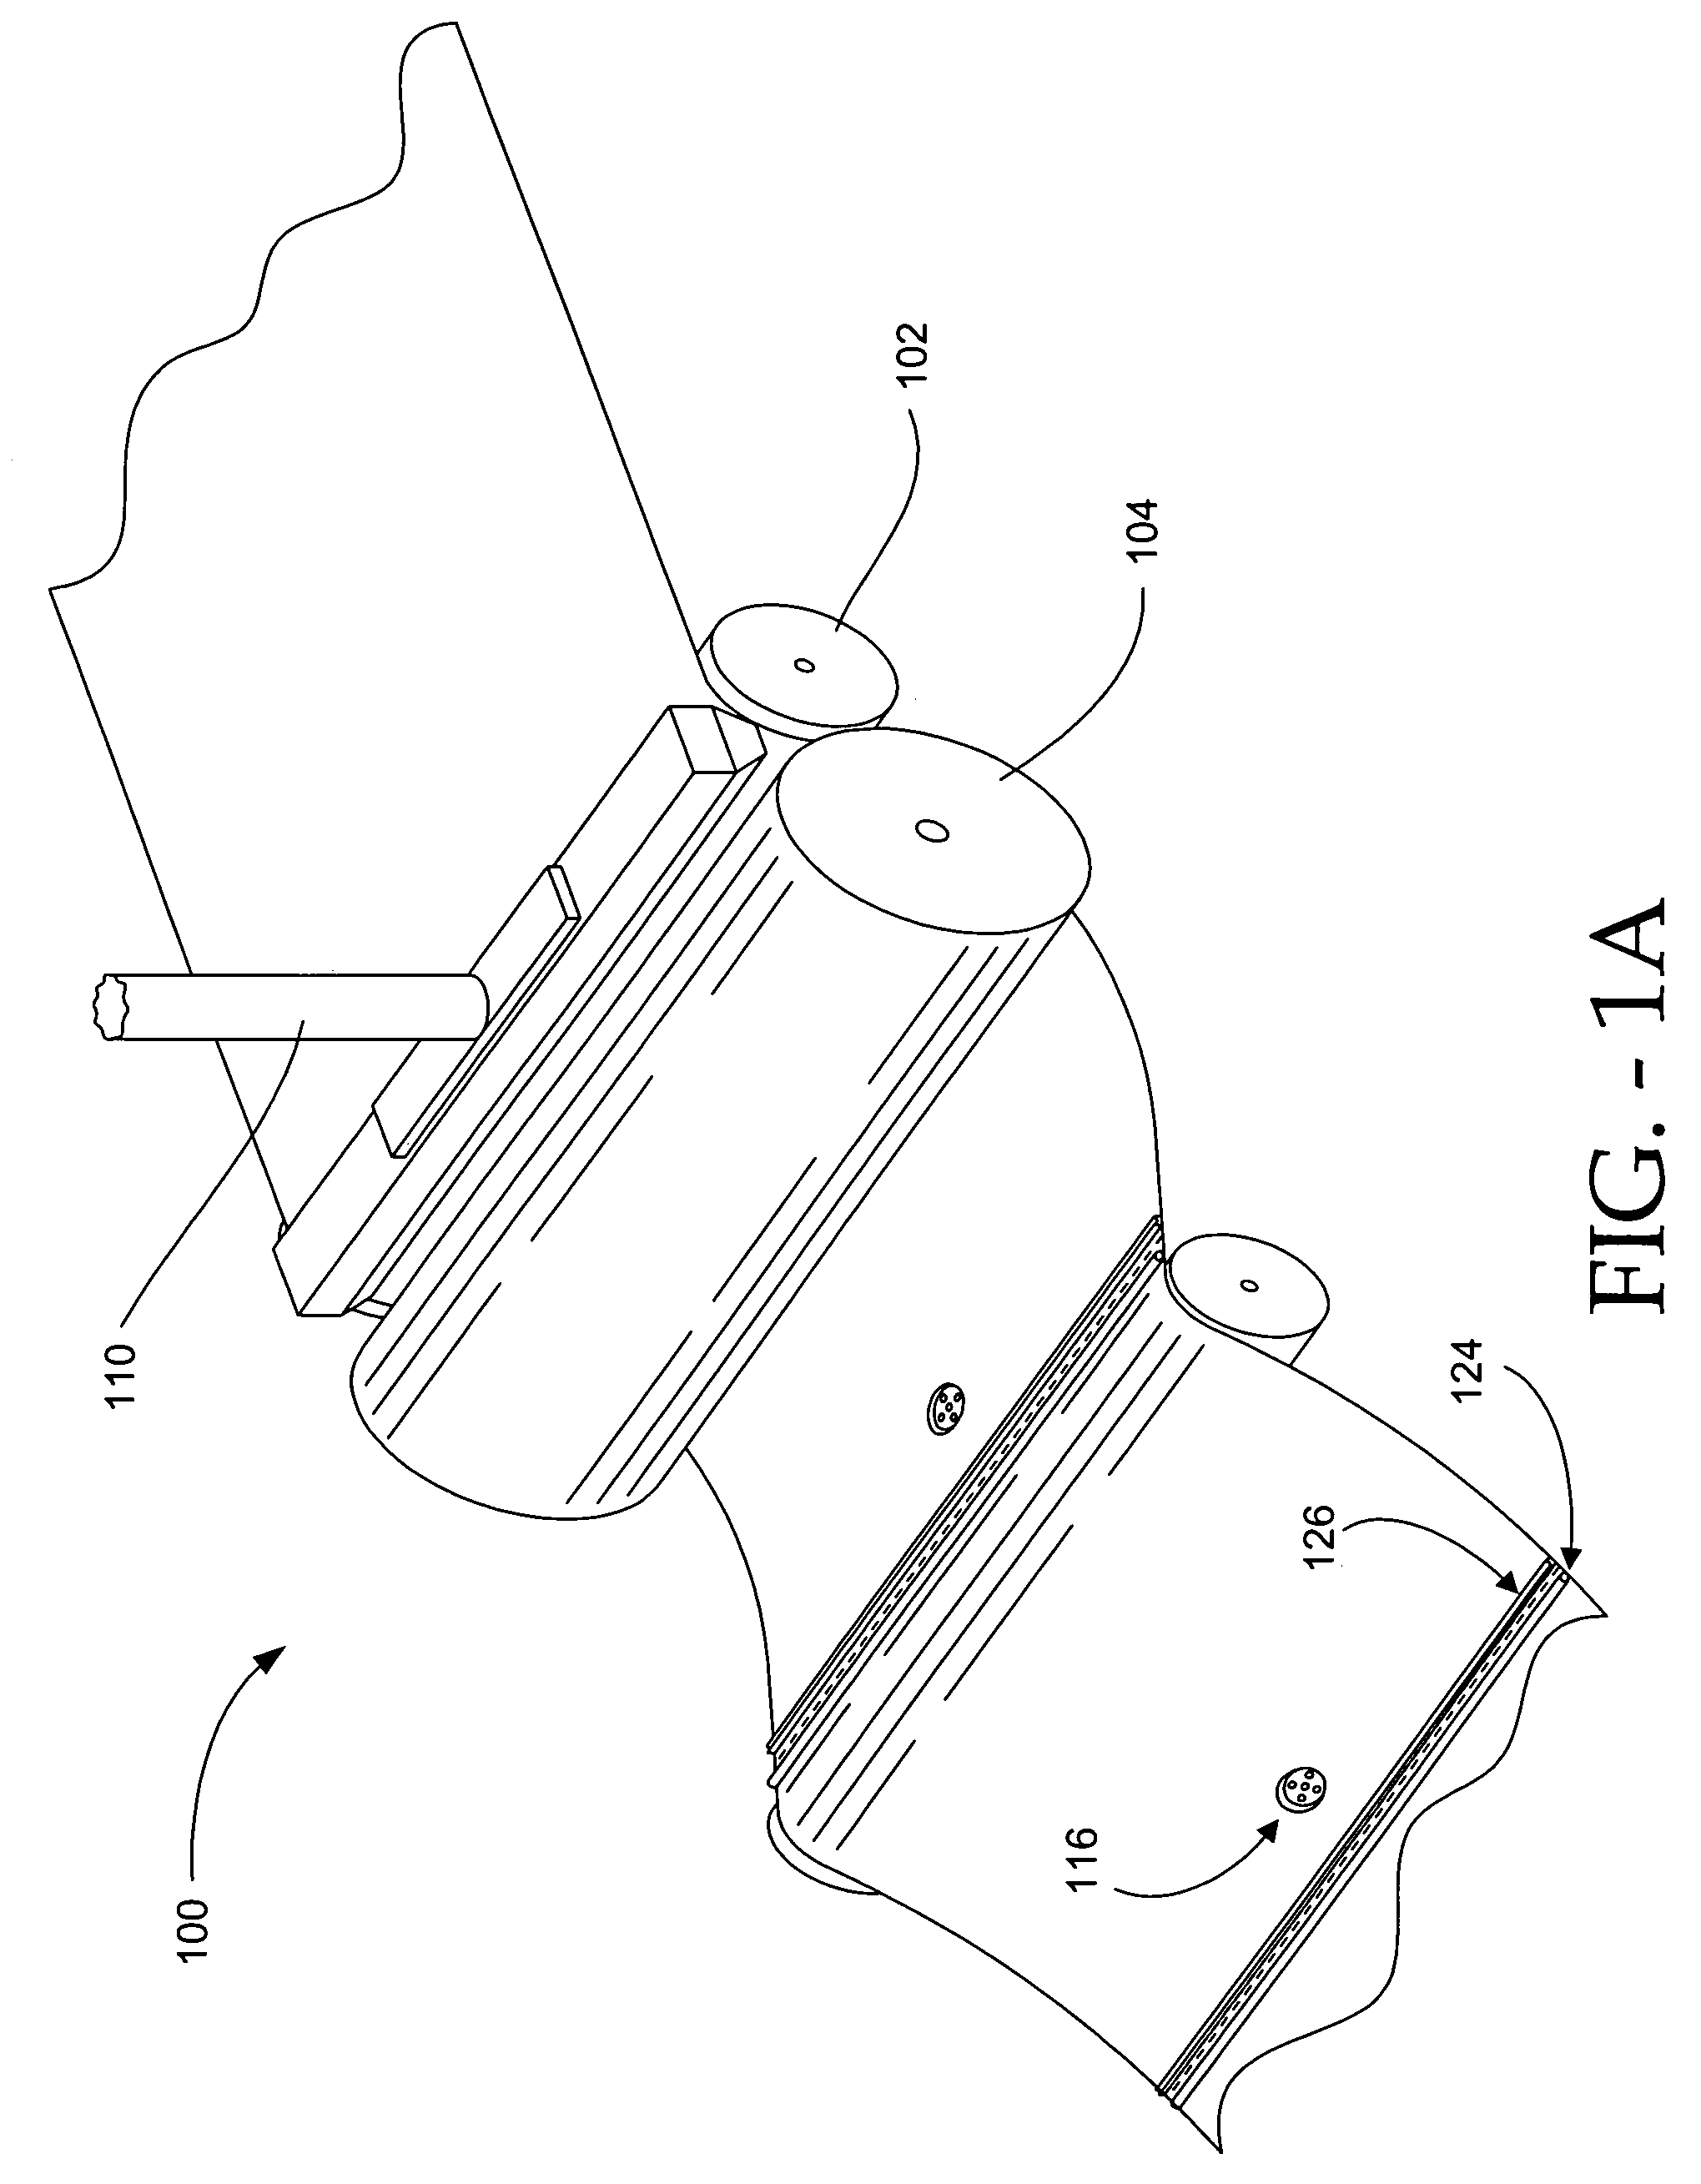 Method for manufacturing a sealable bag having an integrated zipper for use in vacuum packaging